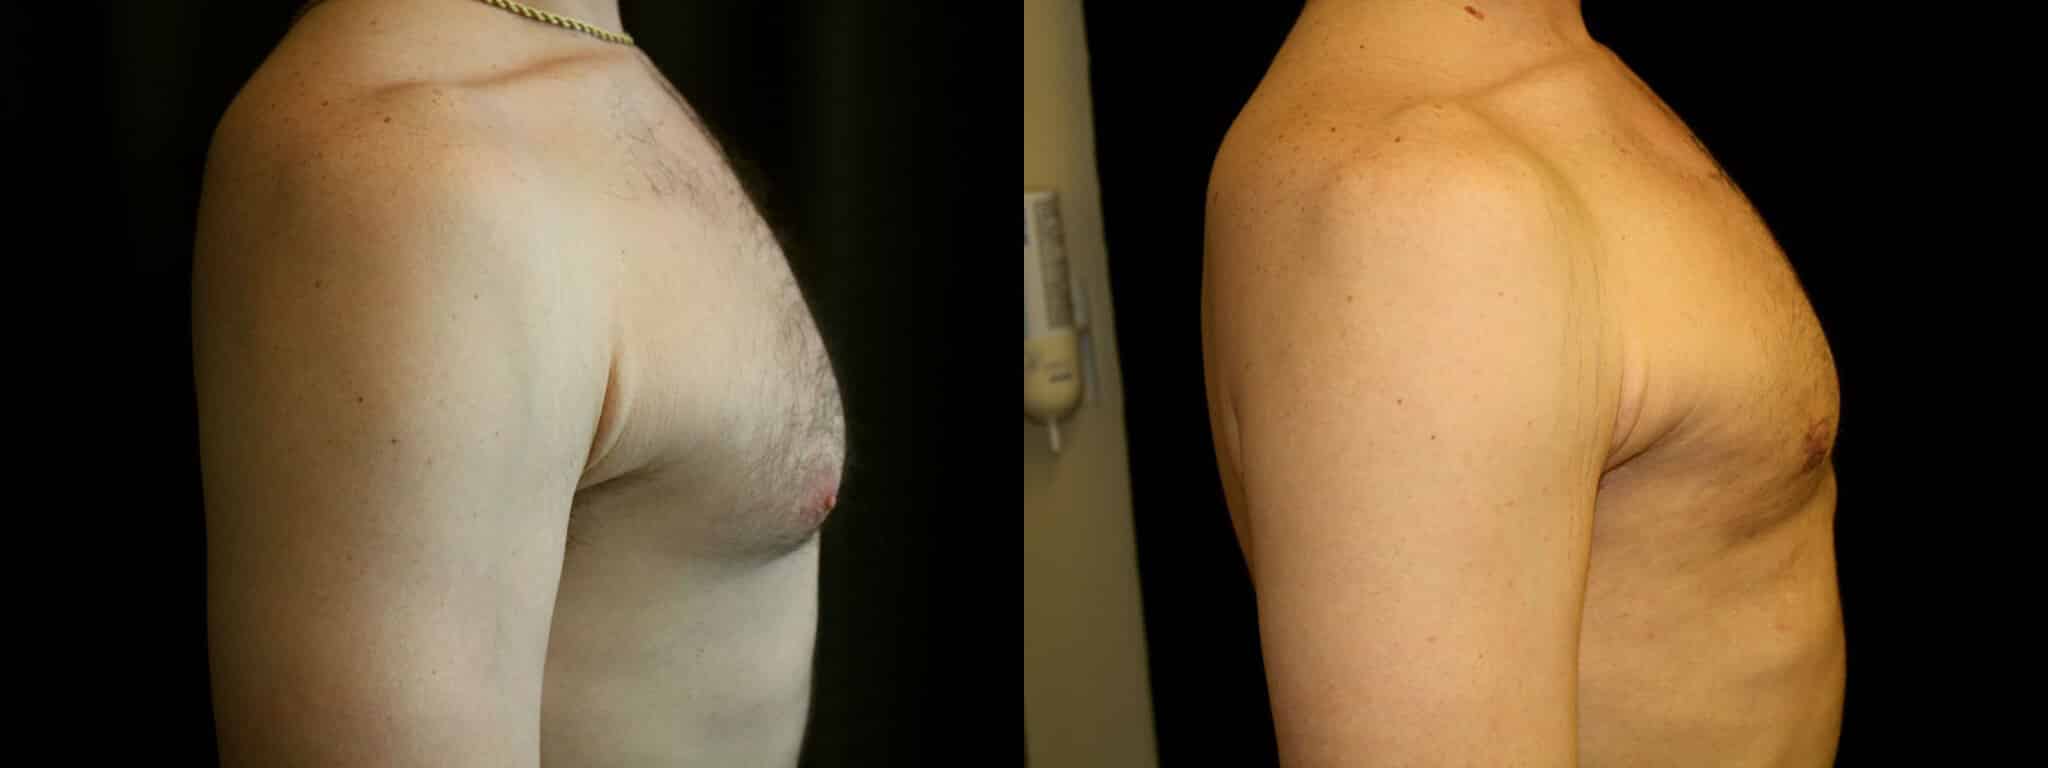 Gynecomastia Patient 7 Before & After Details